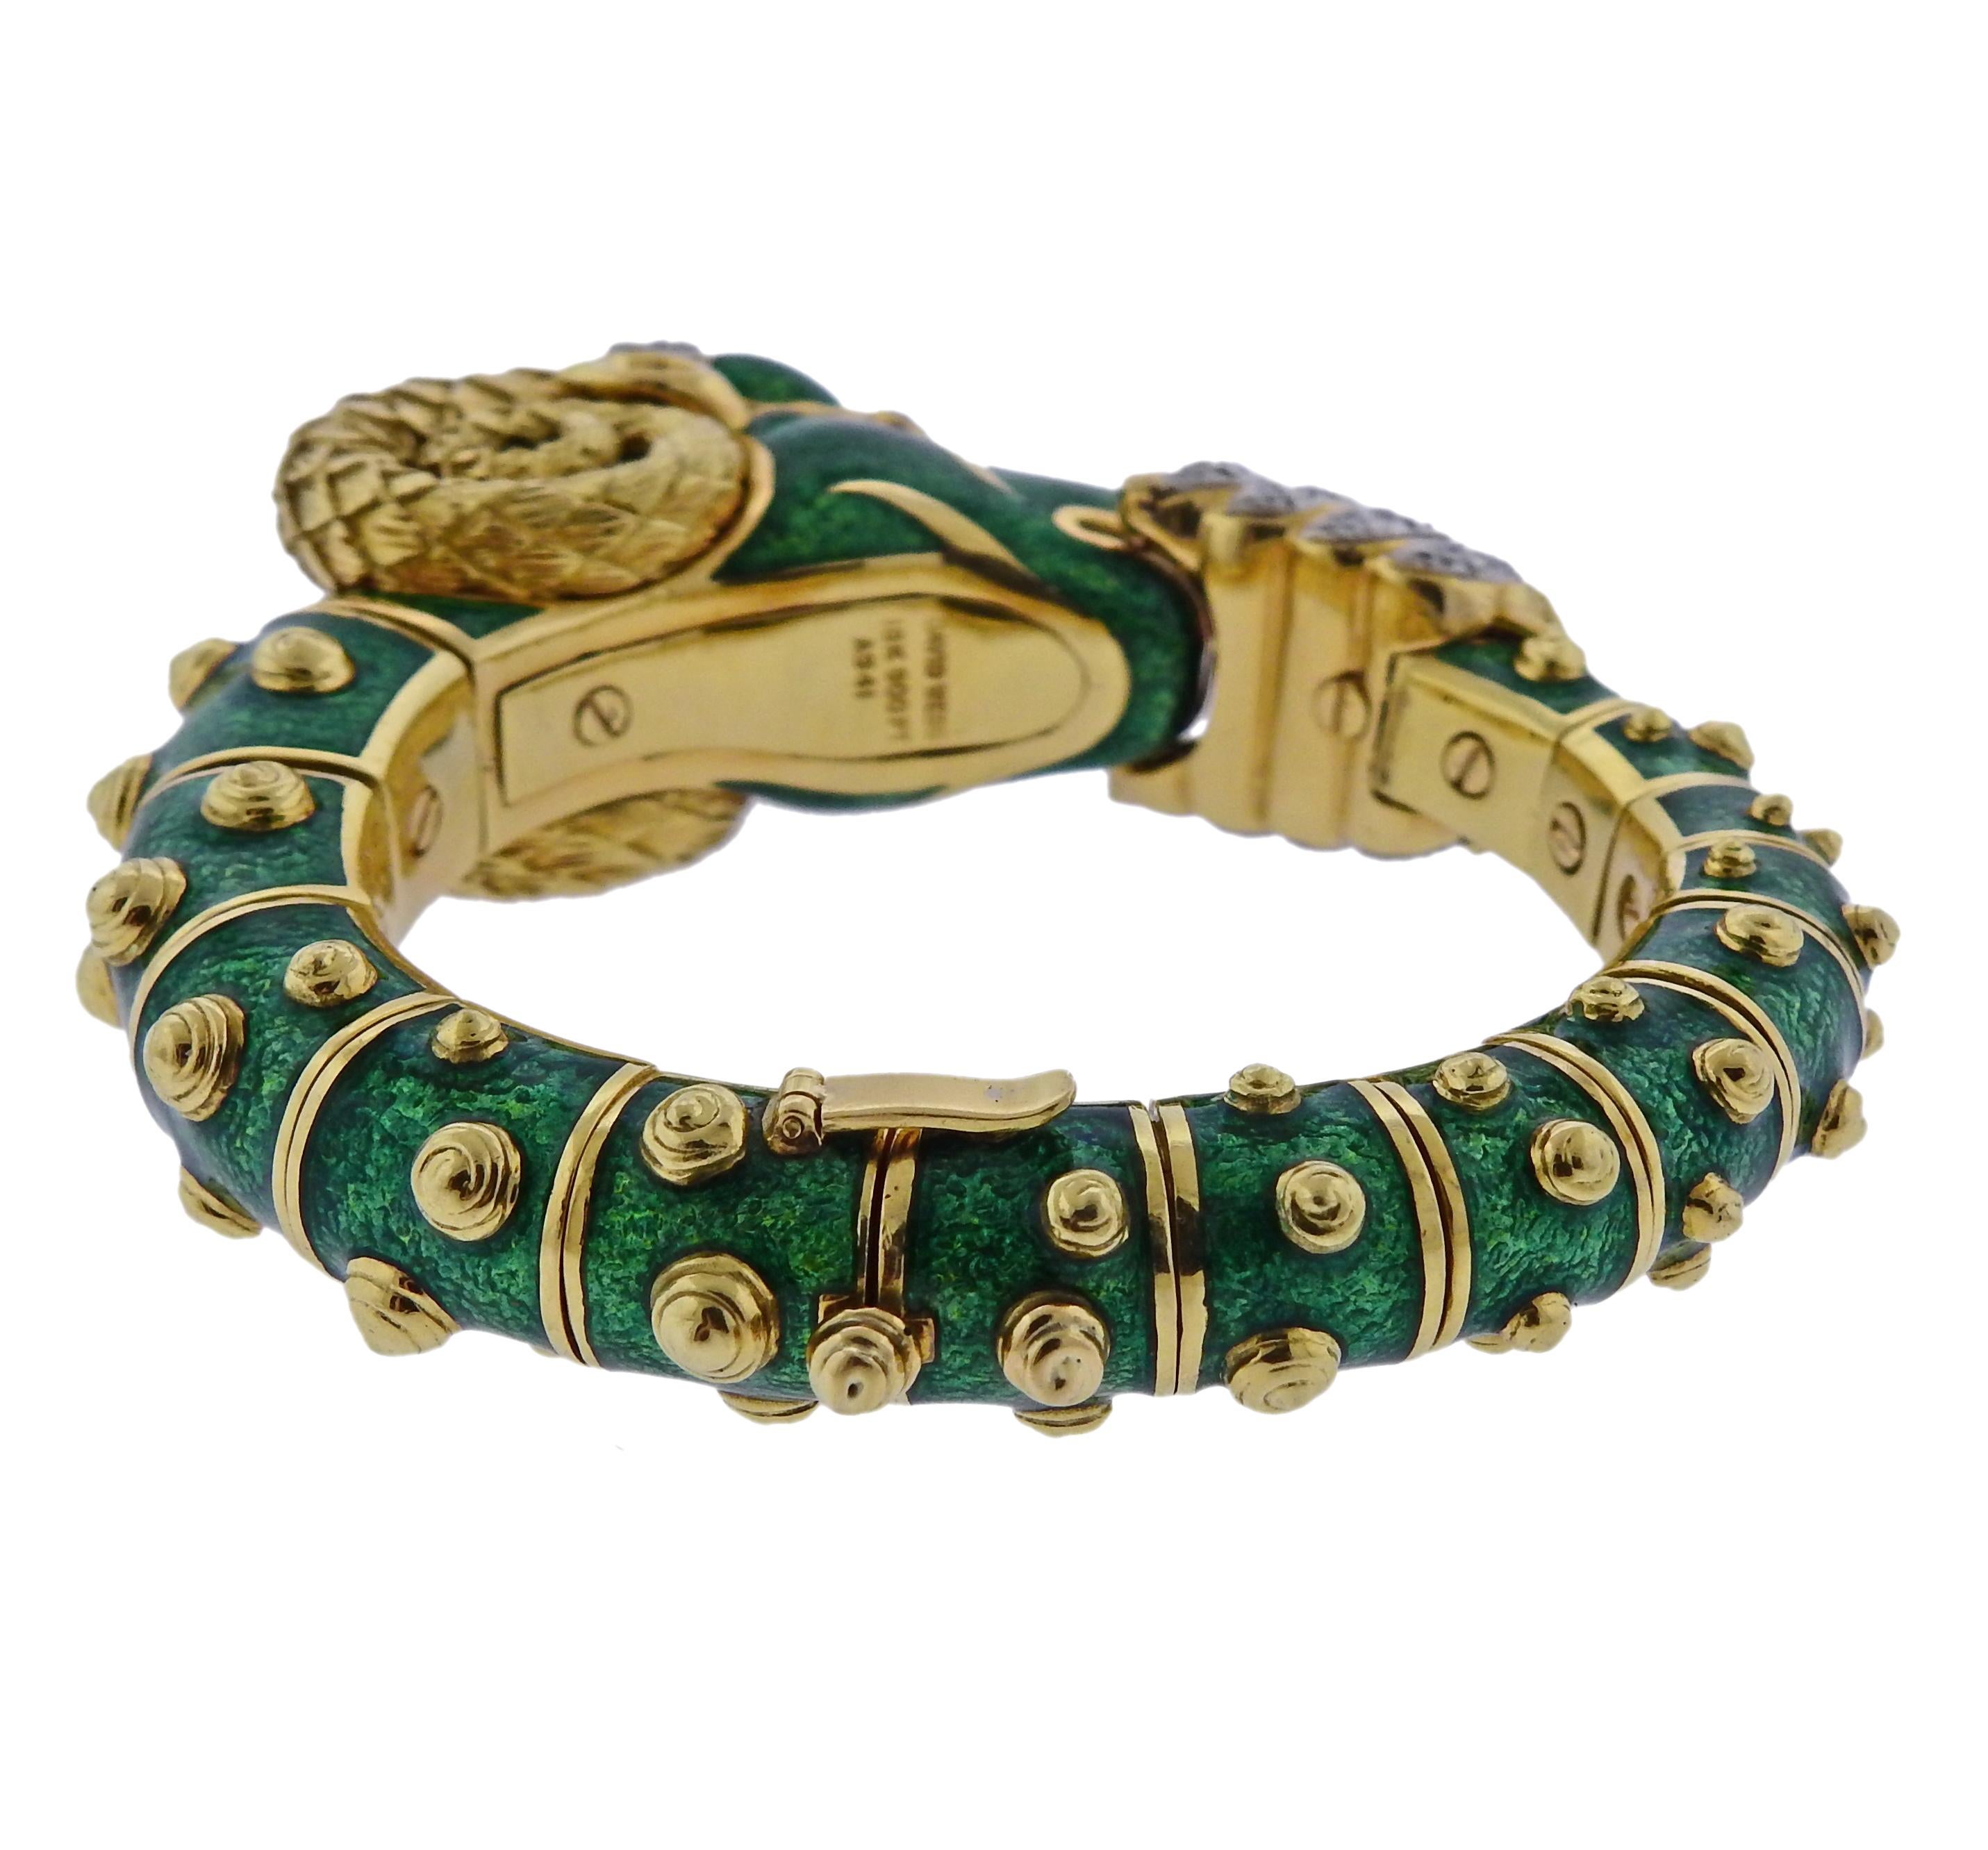 Iconic 18k gold, platinum and green enamel ram's head bracelet by David Webb, set with approx. 1.70ctw in VS/G diamonds and rubies. Bracelet will fit up to 7